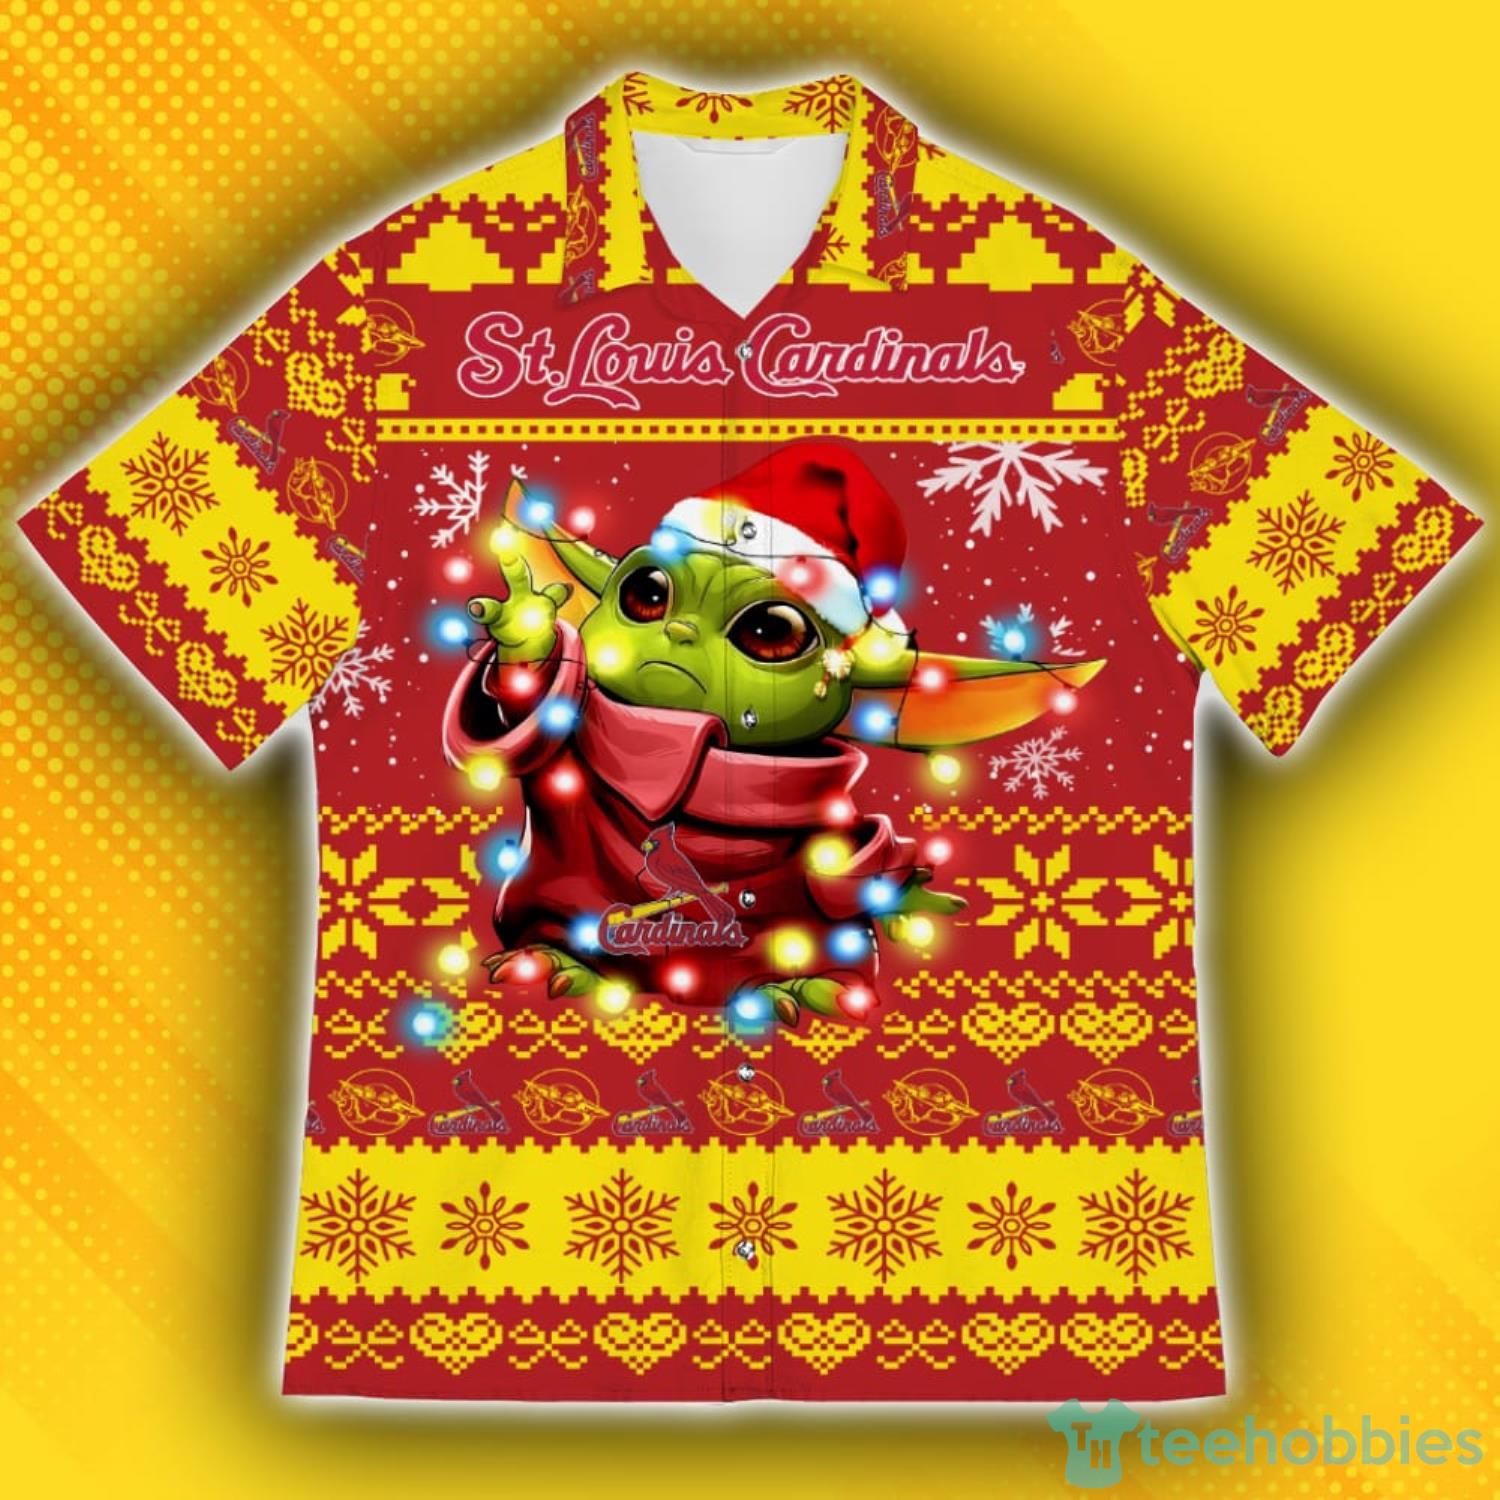 St. Louis Cardinals Baby Yoda Star Wars Ugly Christmas Sweater